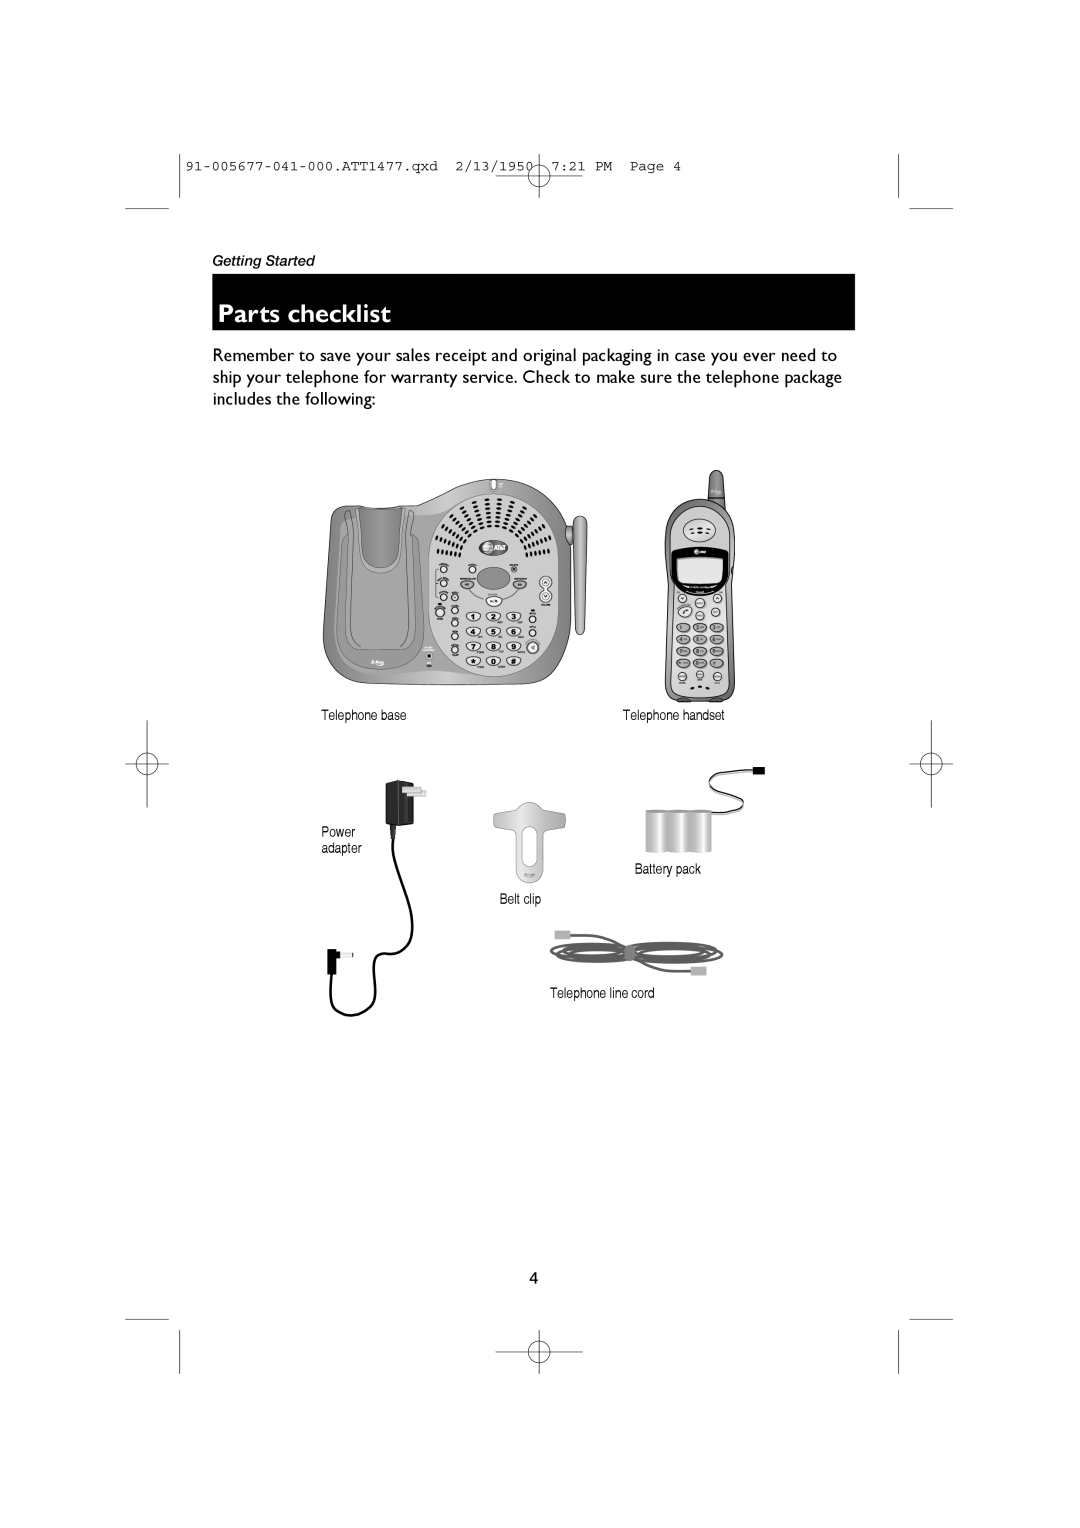 AT&T 1177 user manual Parts checklist, 91-005677-041-000.ATT1477.qxd 2/13/1950 721 PM Page, Getting Started, Power adapter 